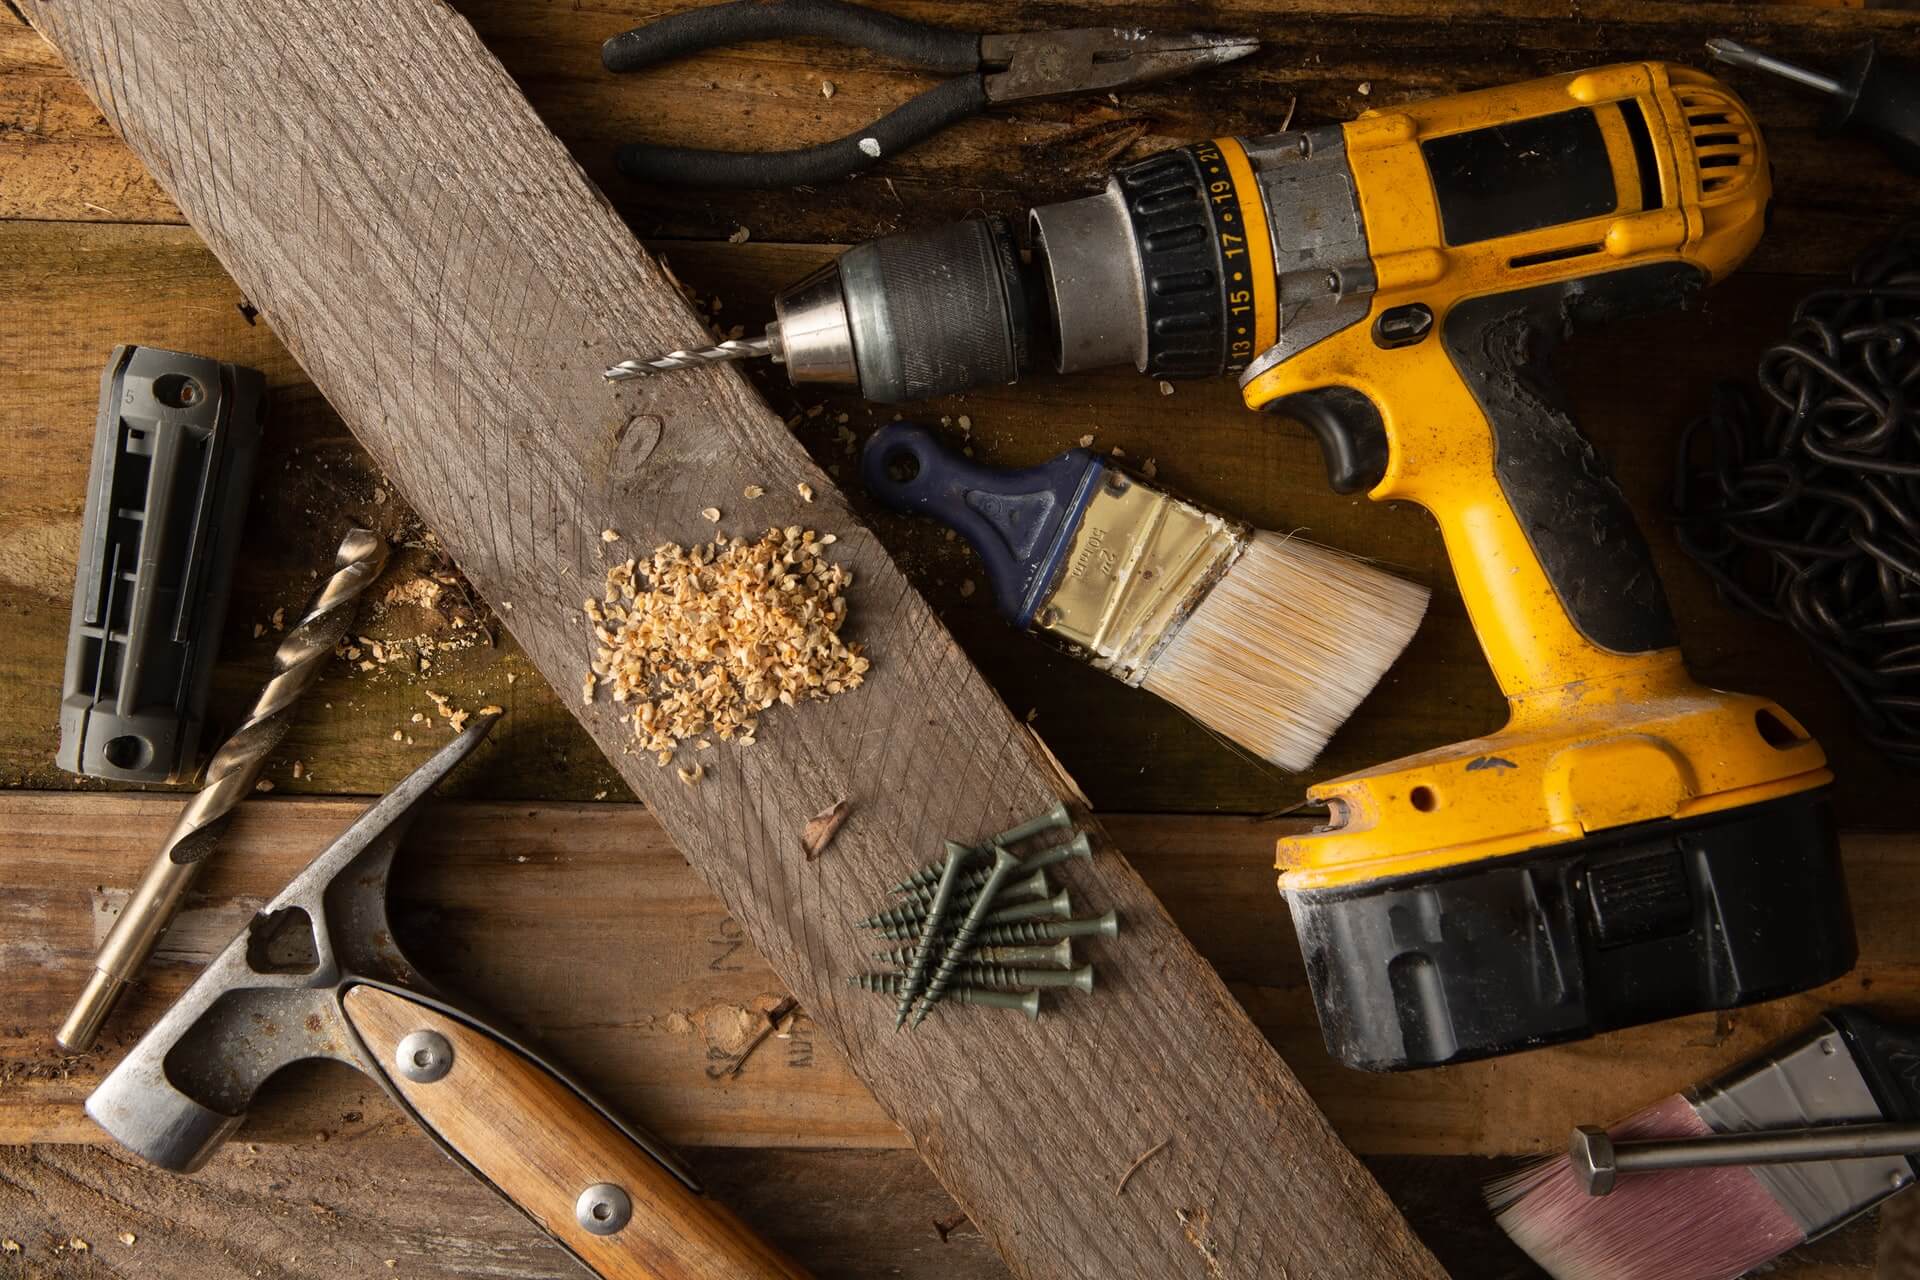 Power Up Your Home Power Tools You Need for DIY and Home Repairs